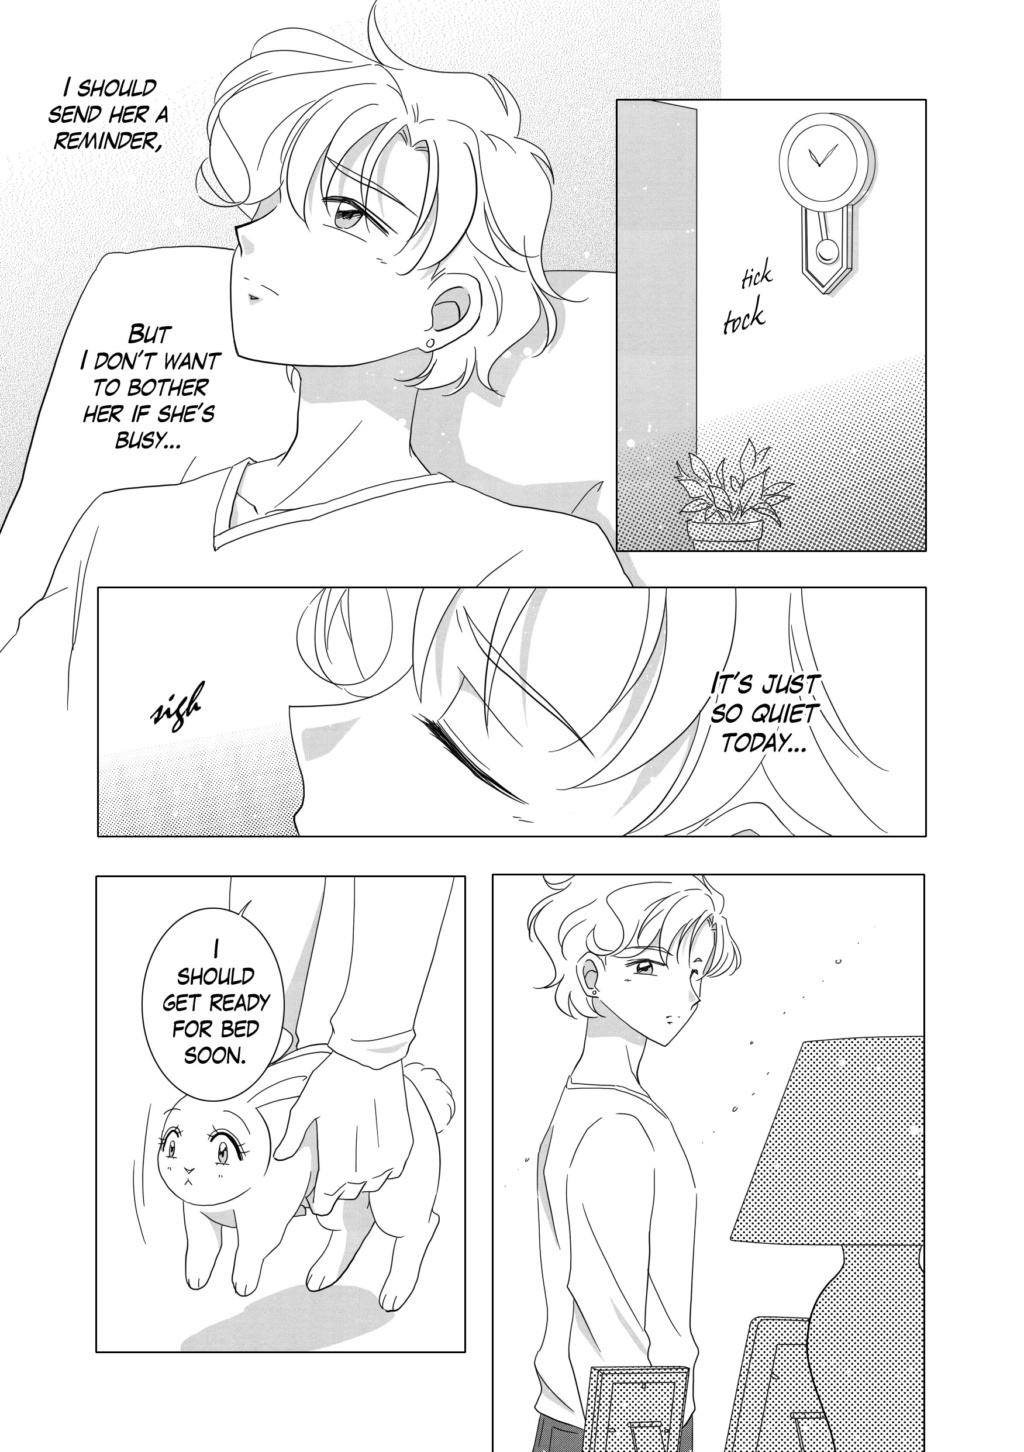 [F] My 30th century Chibi-Usa x Helios doujinshi project: UPDATED 11-25-18 - Page 19 Sbs_pg25